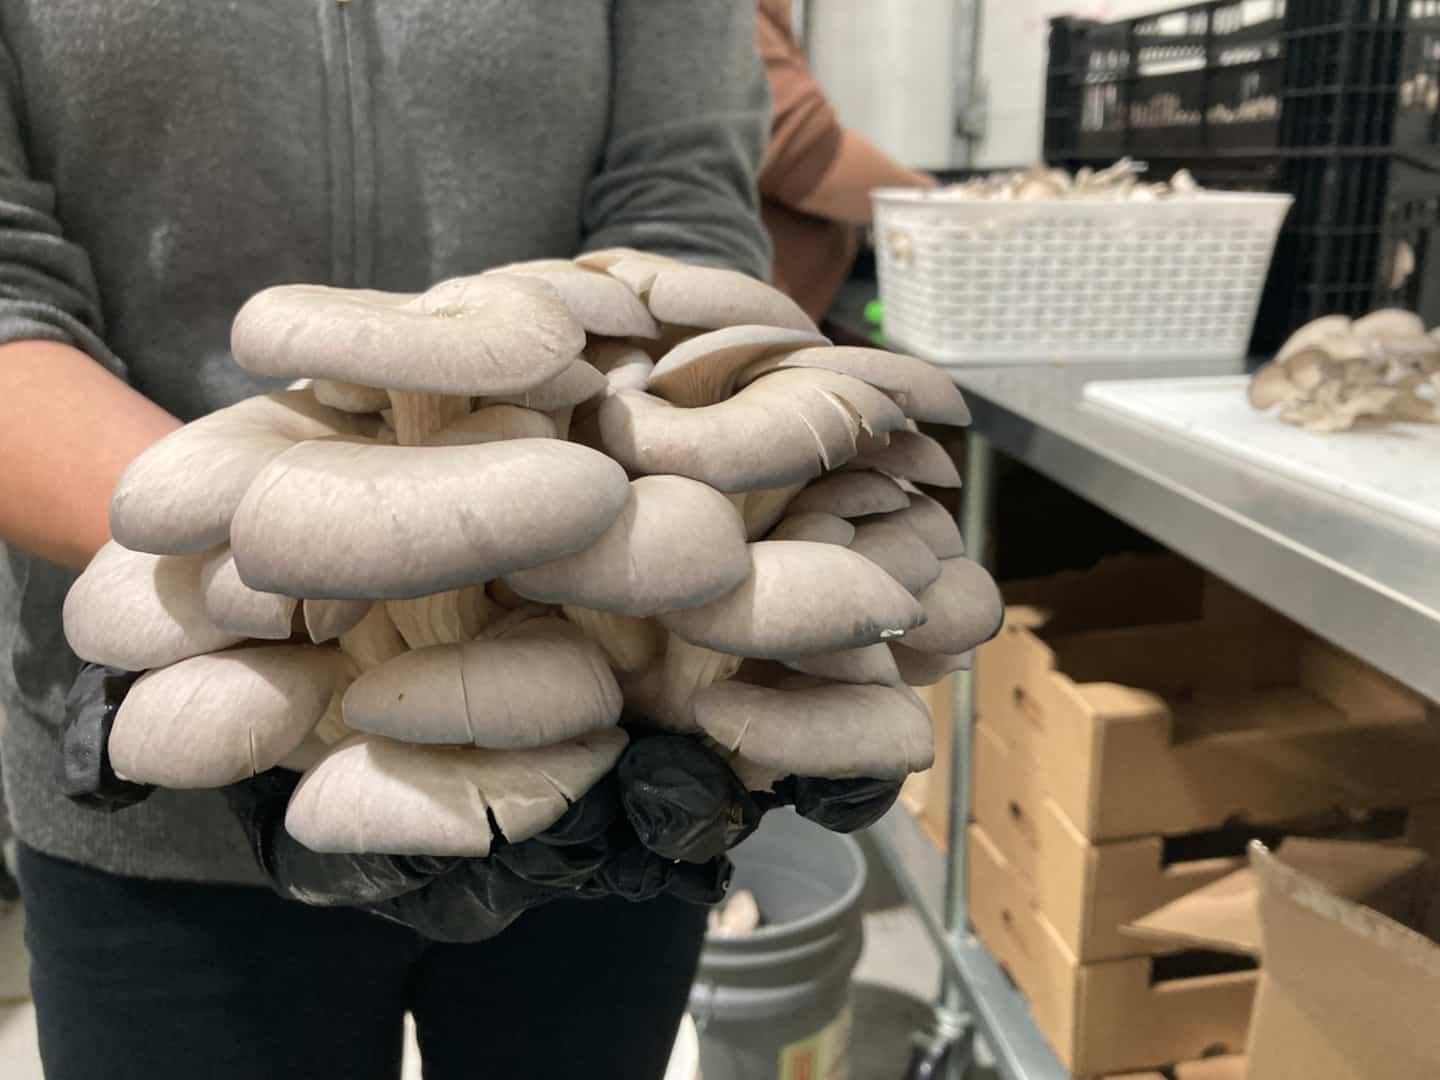 Gray oyster mushrooms from Quebec available in grocery stores